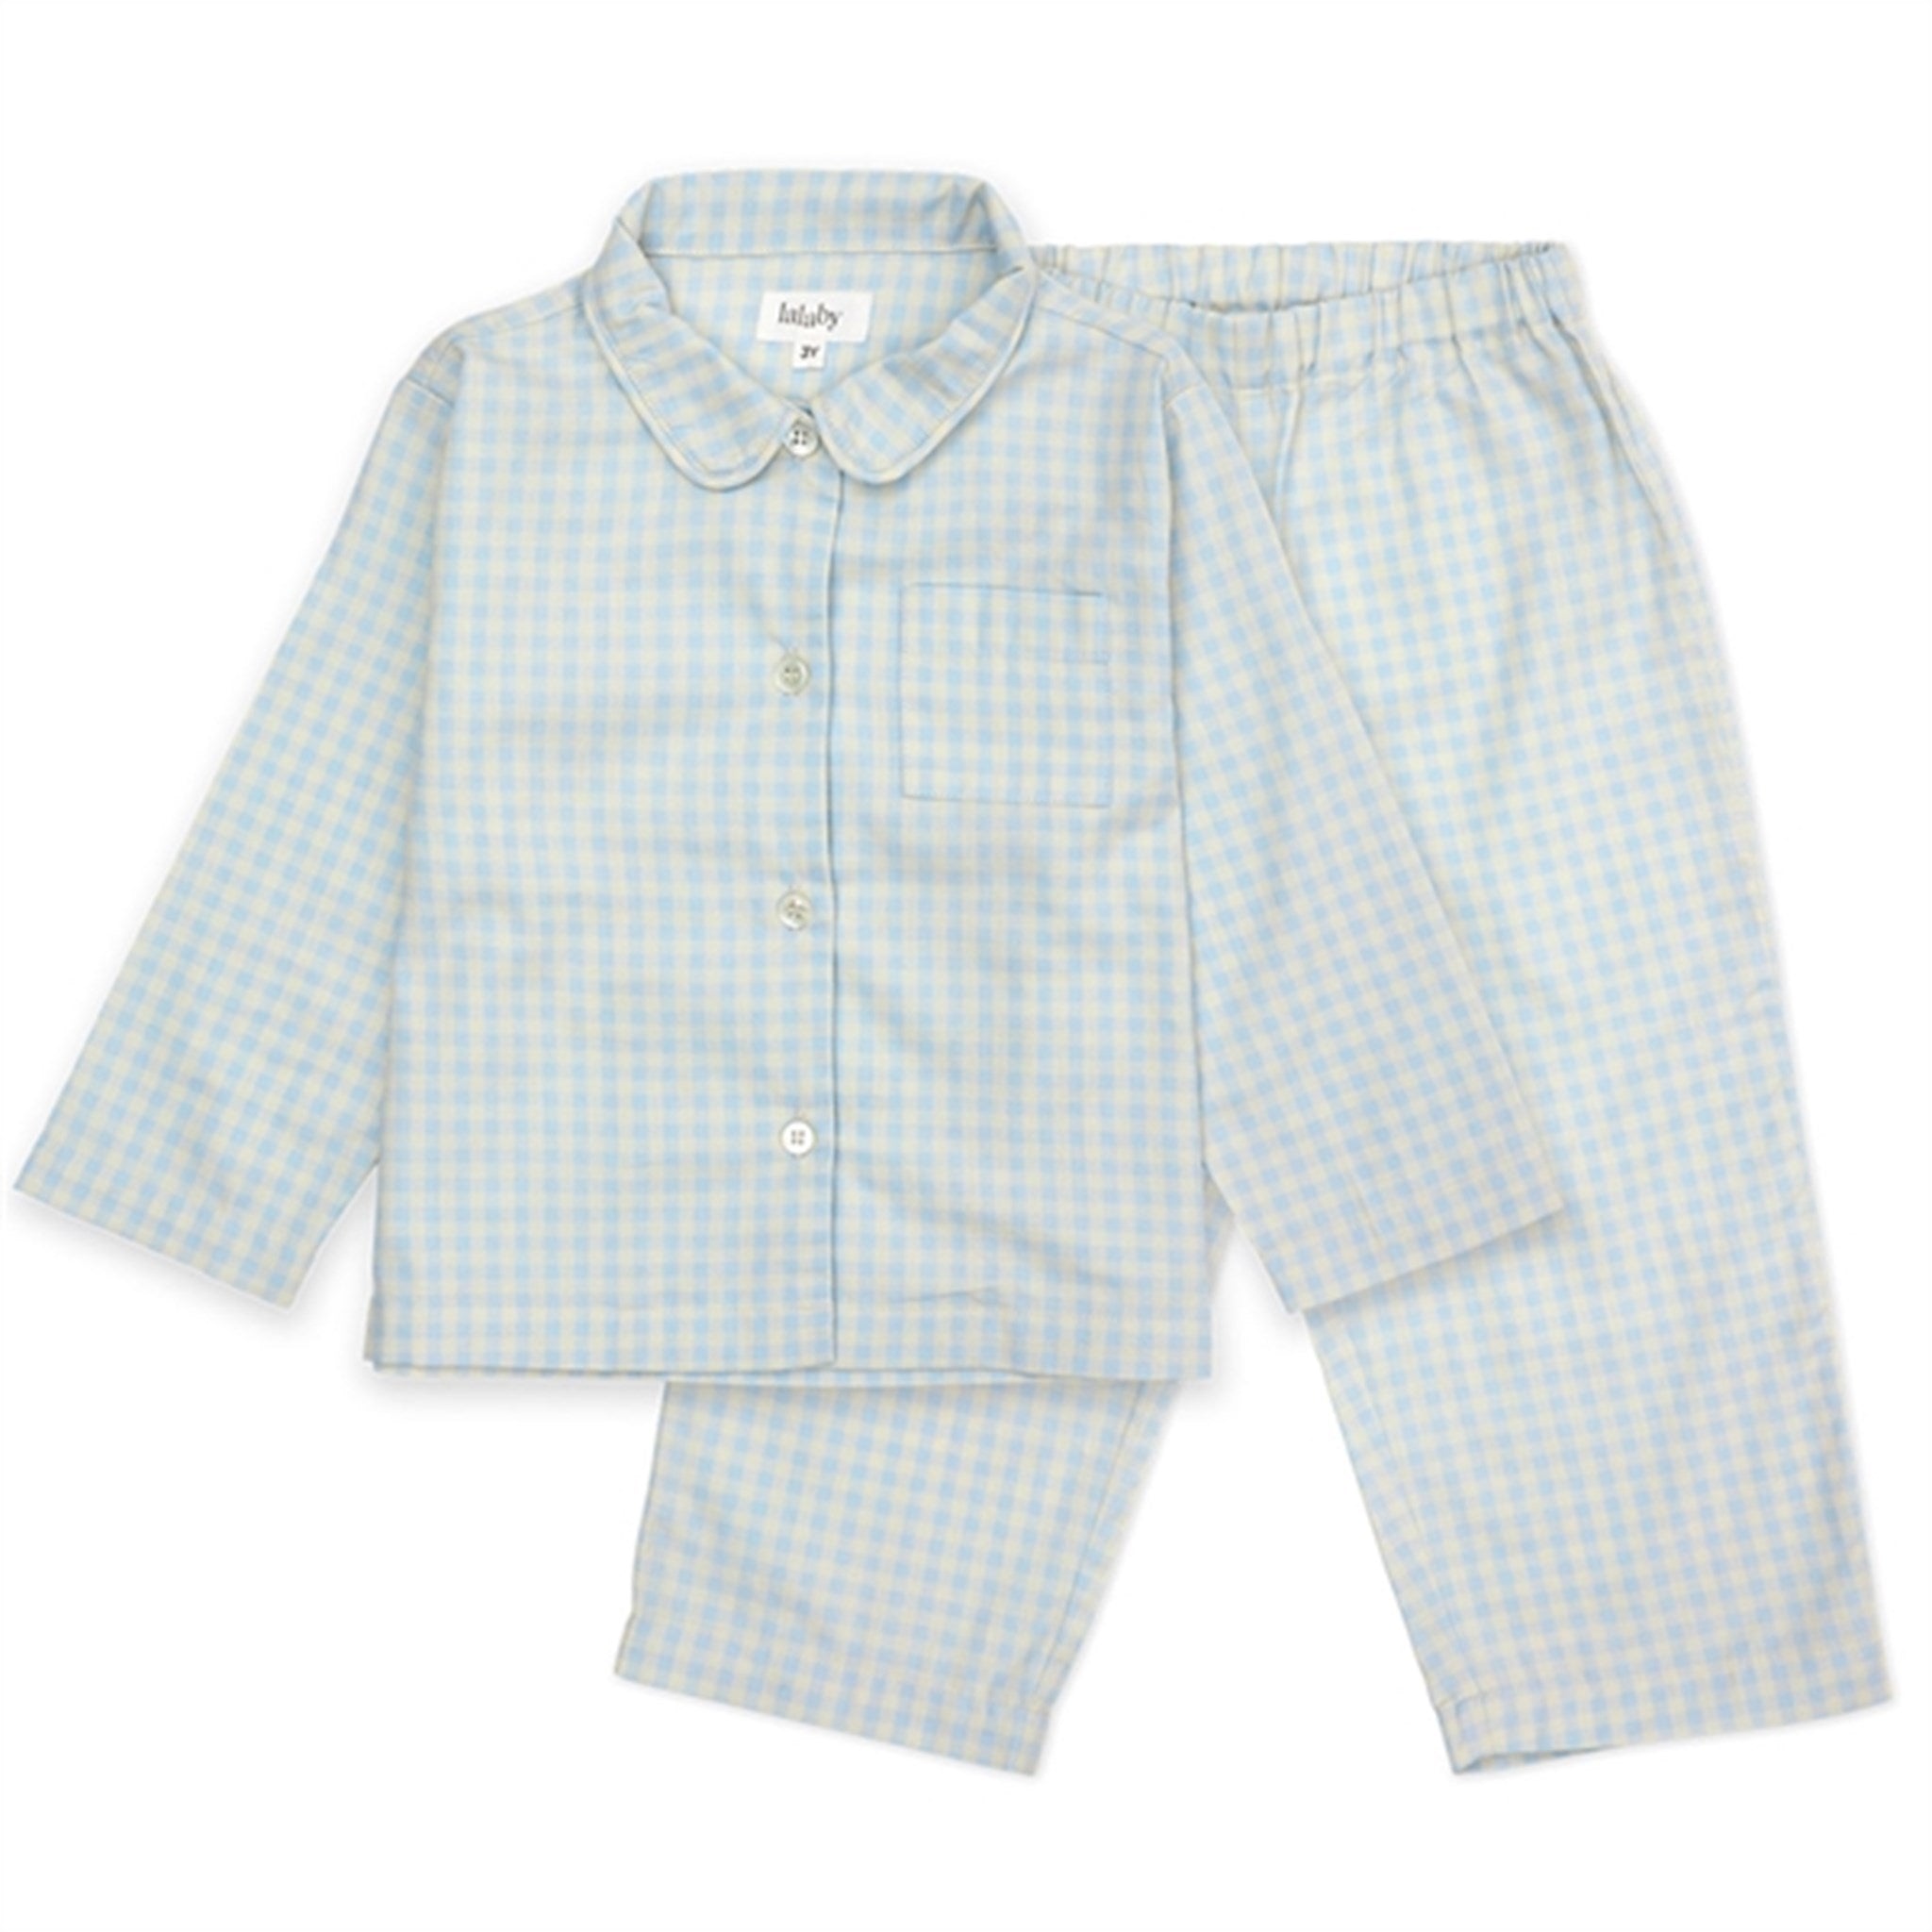 lalaby Blue Gingham Classic Pyjamas